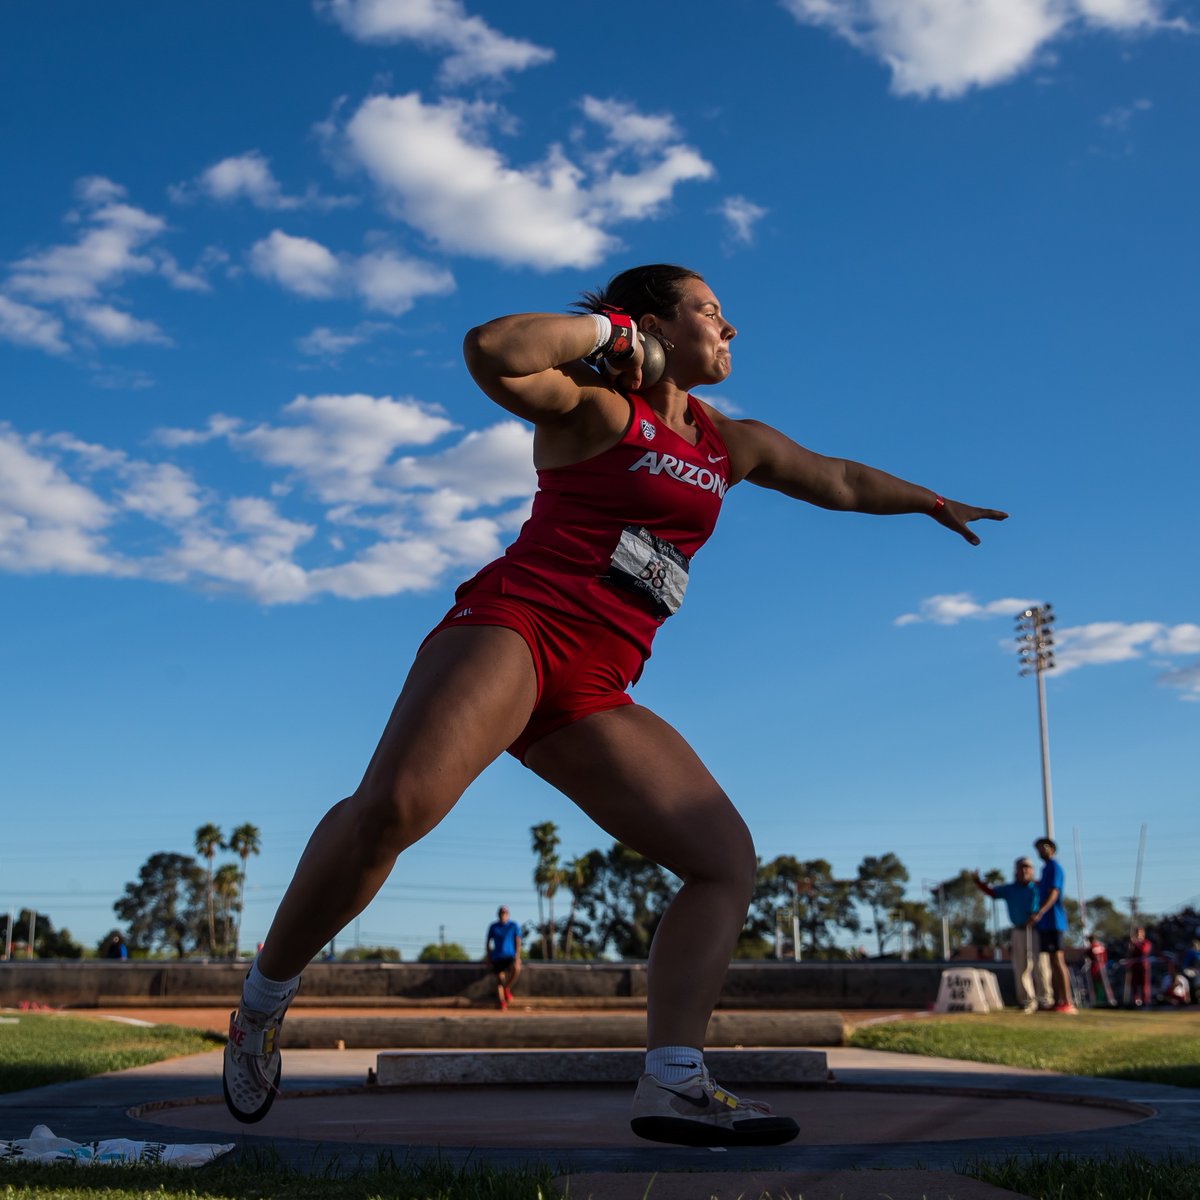 𝐒𝐇𝐎𝐓 𝐏𝐔𝐓 𝐅𝐈𝐍𝐀𝐋

Lauryn Love finishes second in the women's shot put with a throw of 49-11 (15.21m)!

#BearDown | #BeLezoLike